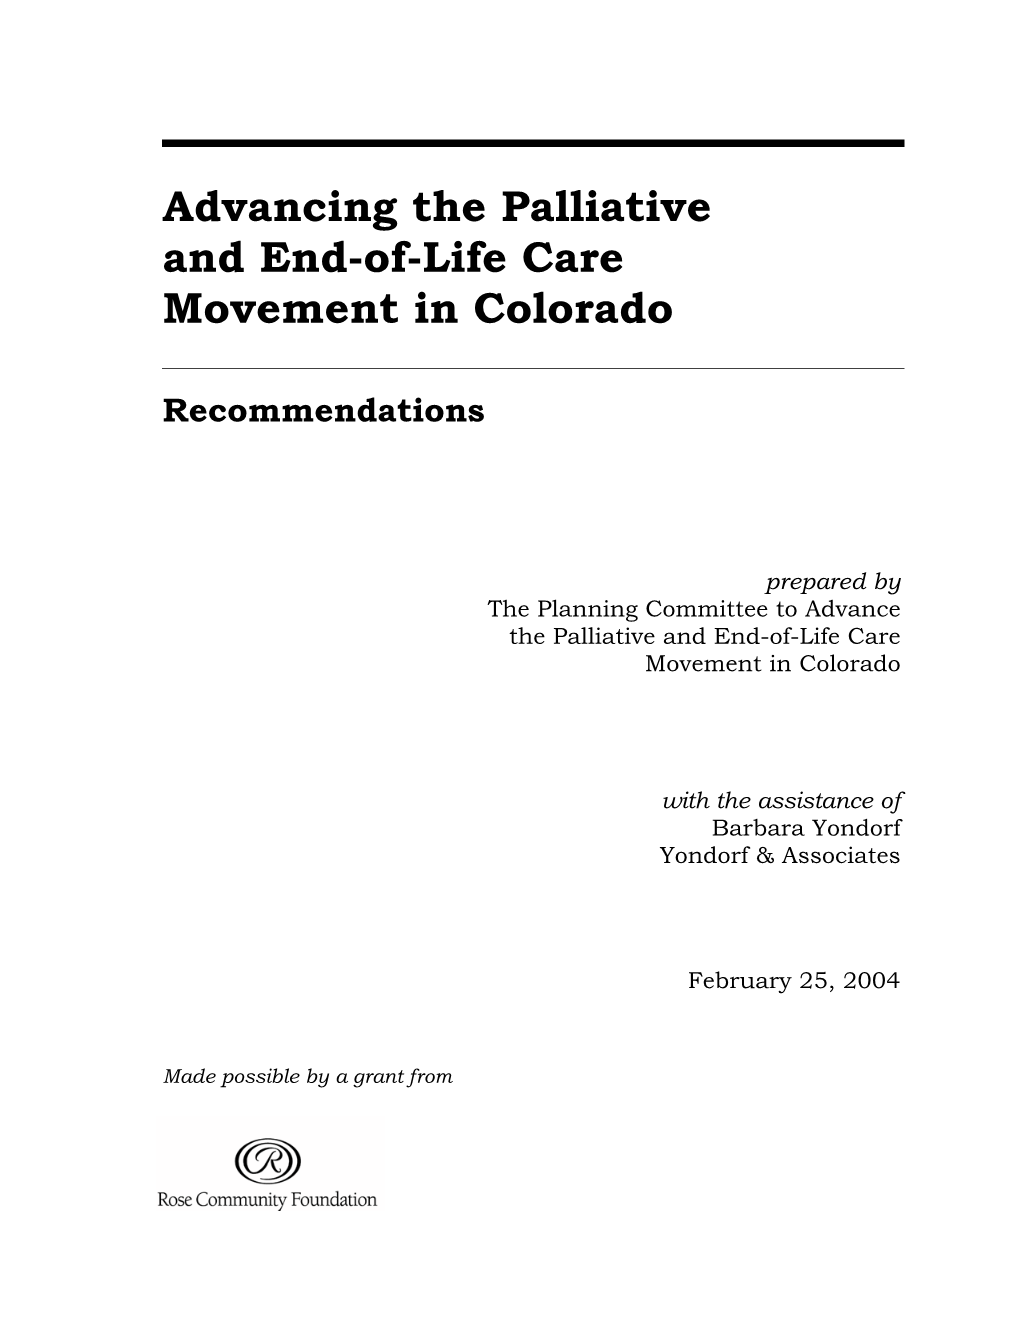 Advancing the Palliative and End-Of-Life Care Movement in Colorado